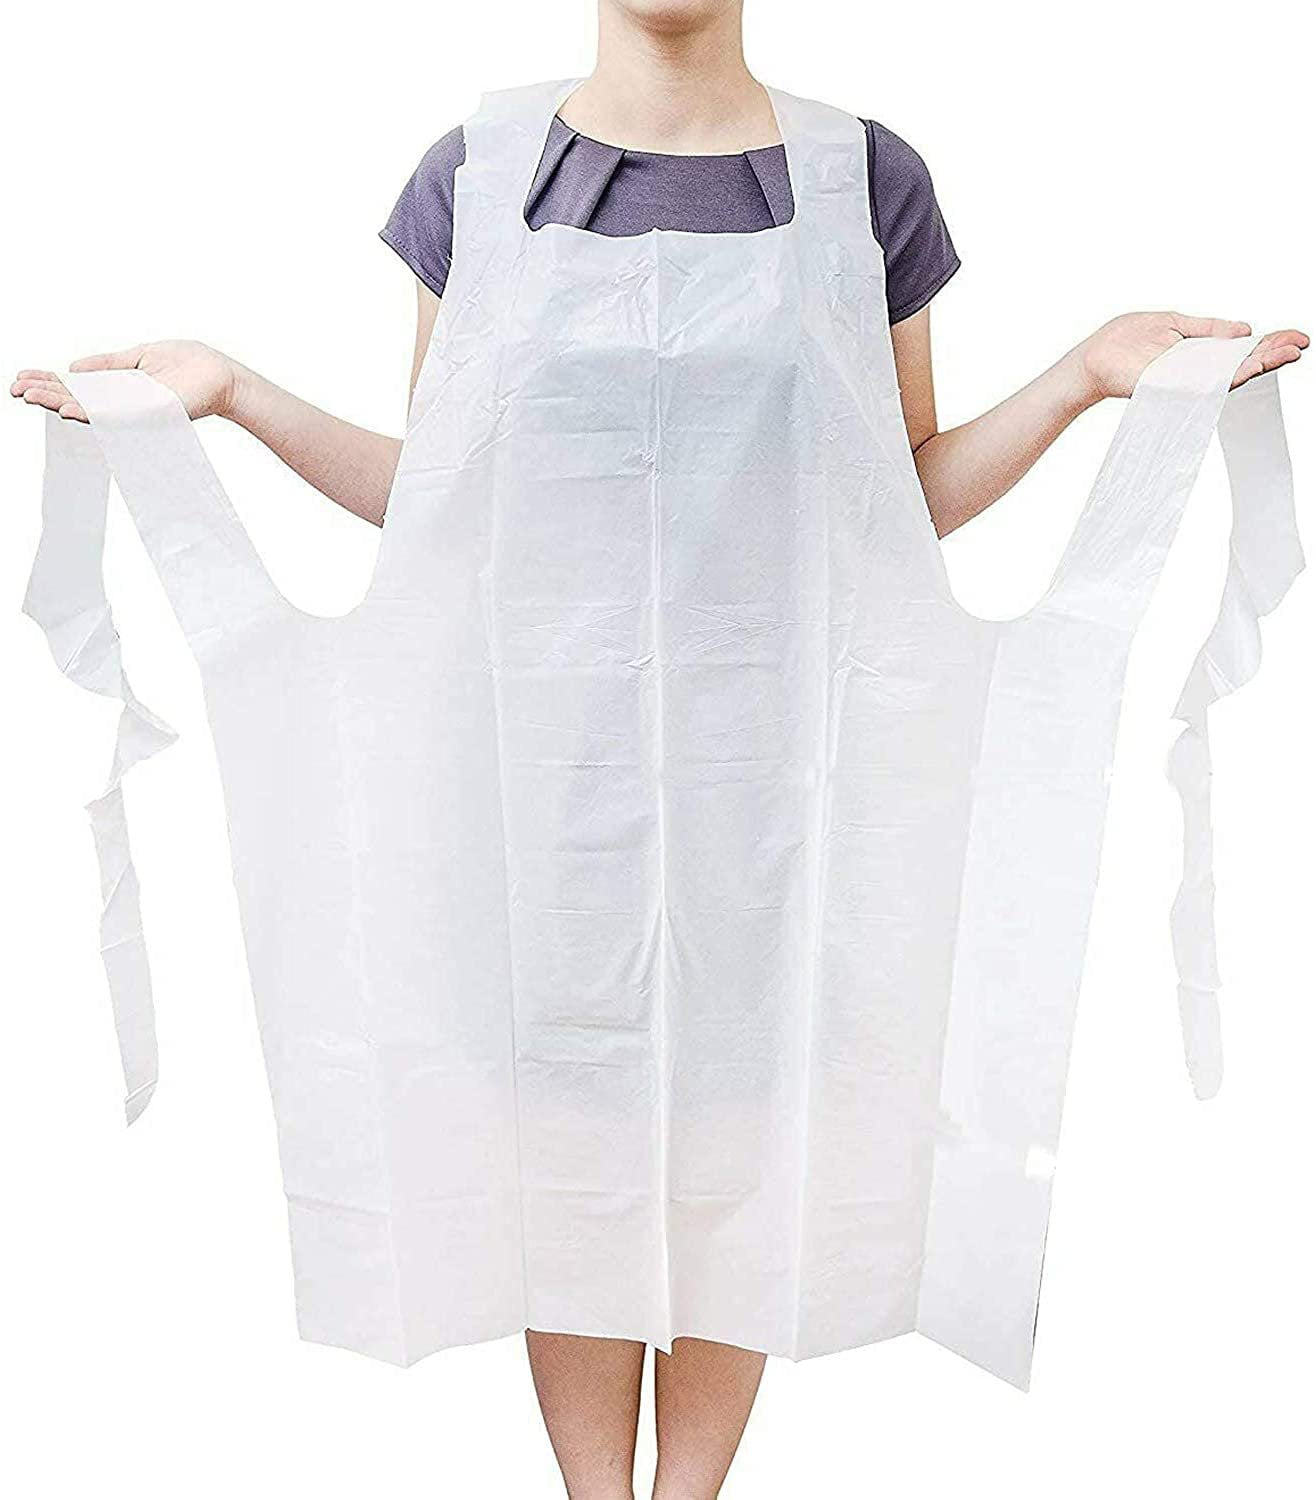 WHITE Disposable Adult Plastic Aprons Kitchen Waterproof Polythene  Apron Gown 